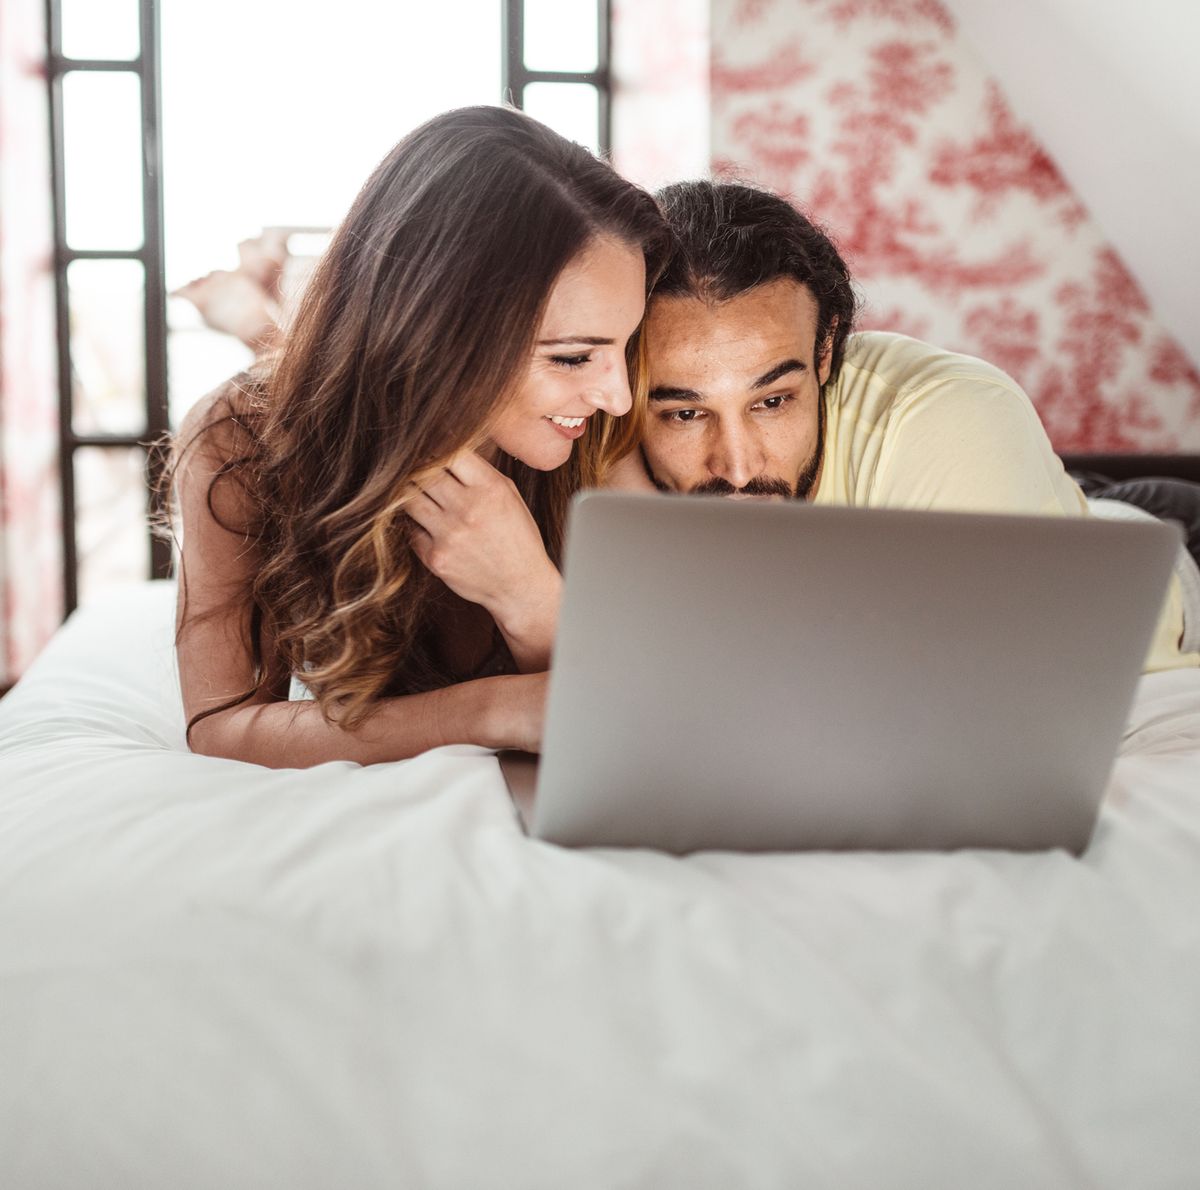 7 Most Popular Types of Porn, Explained - Porn Categories